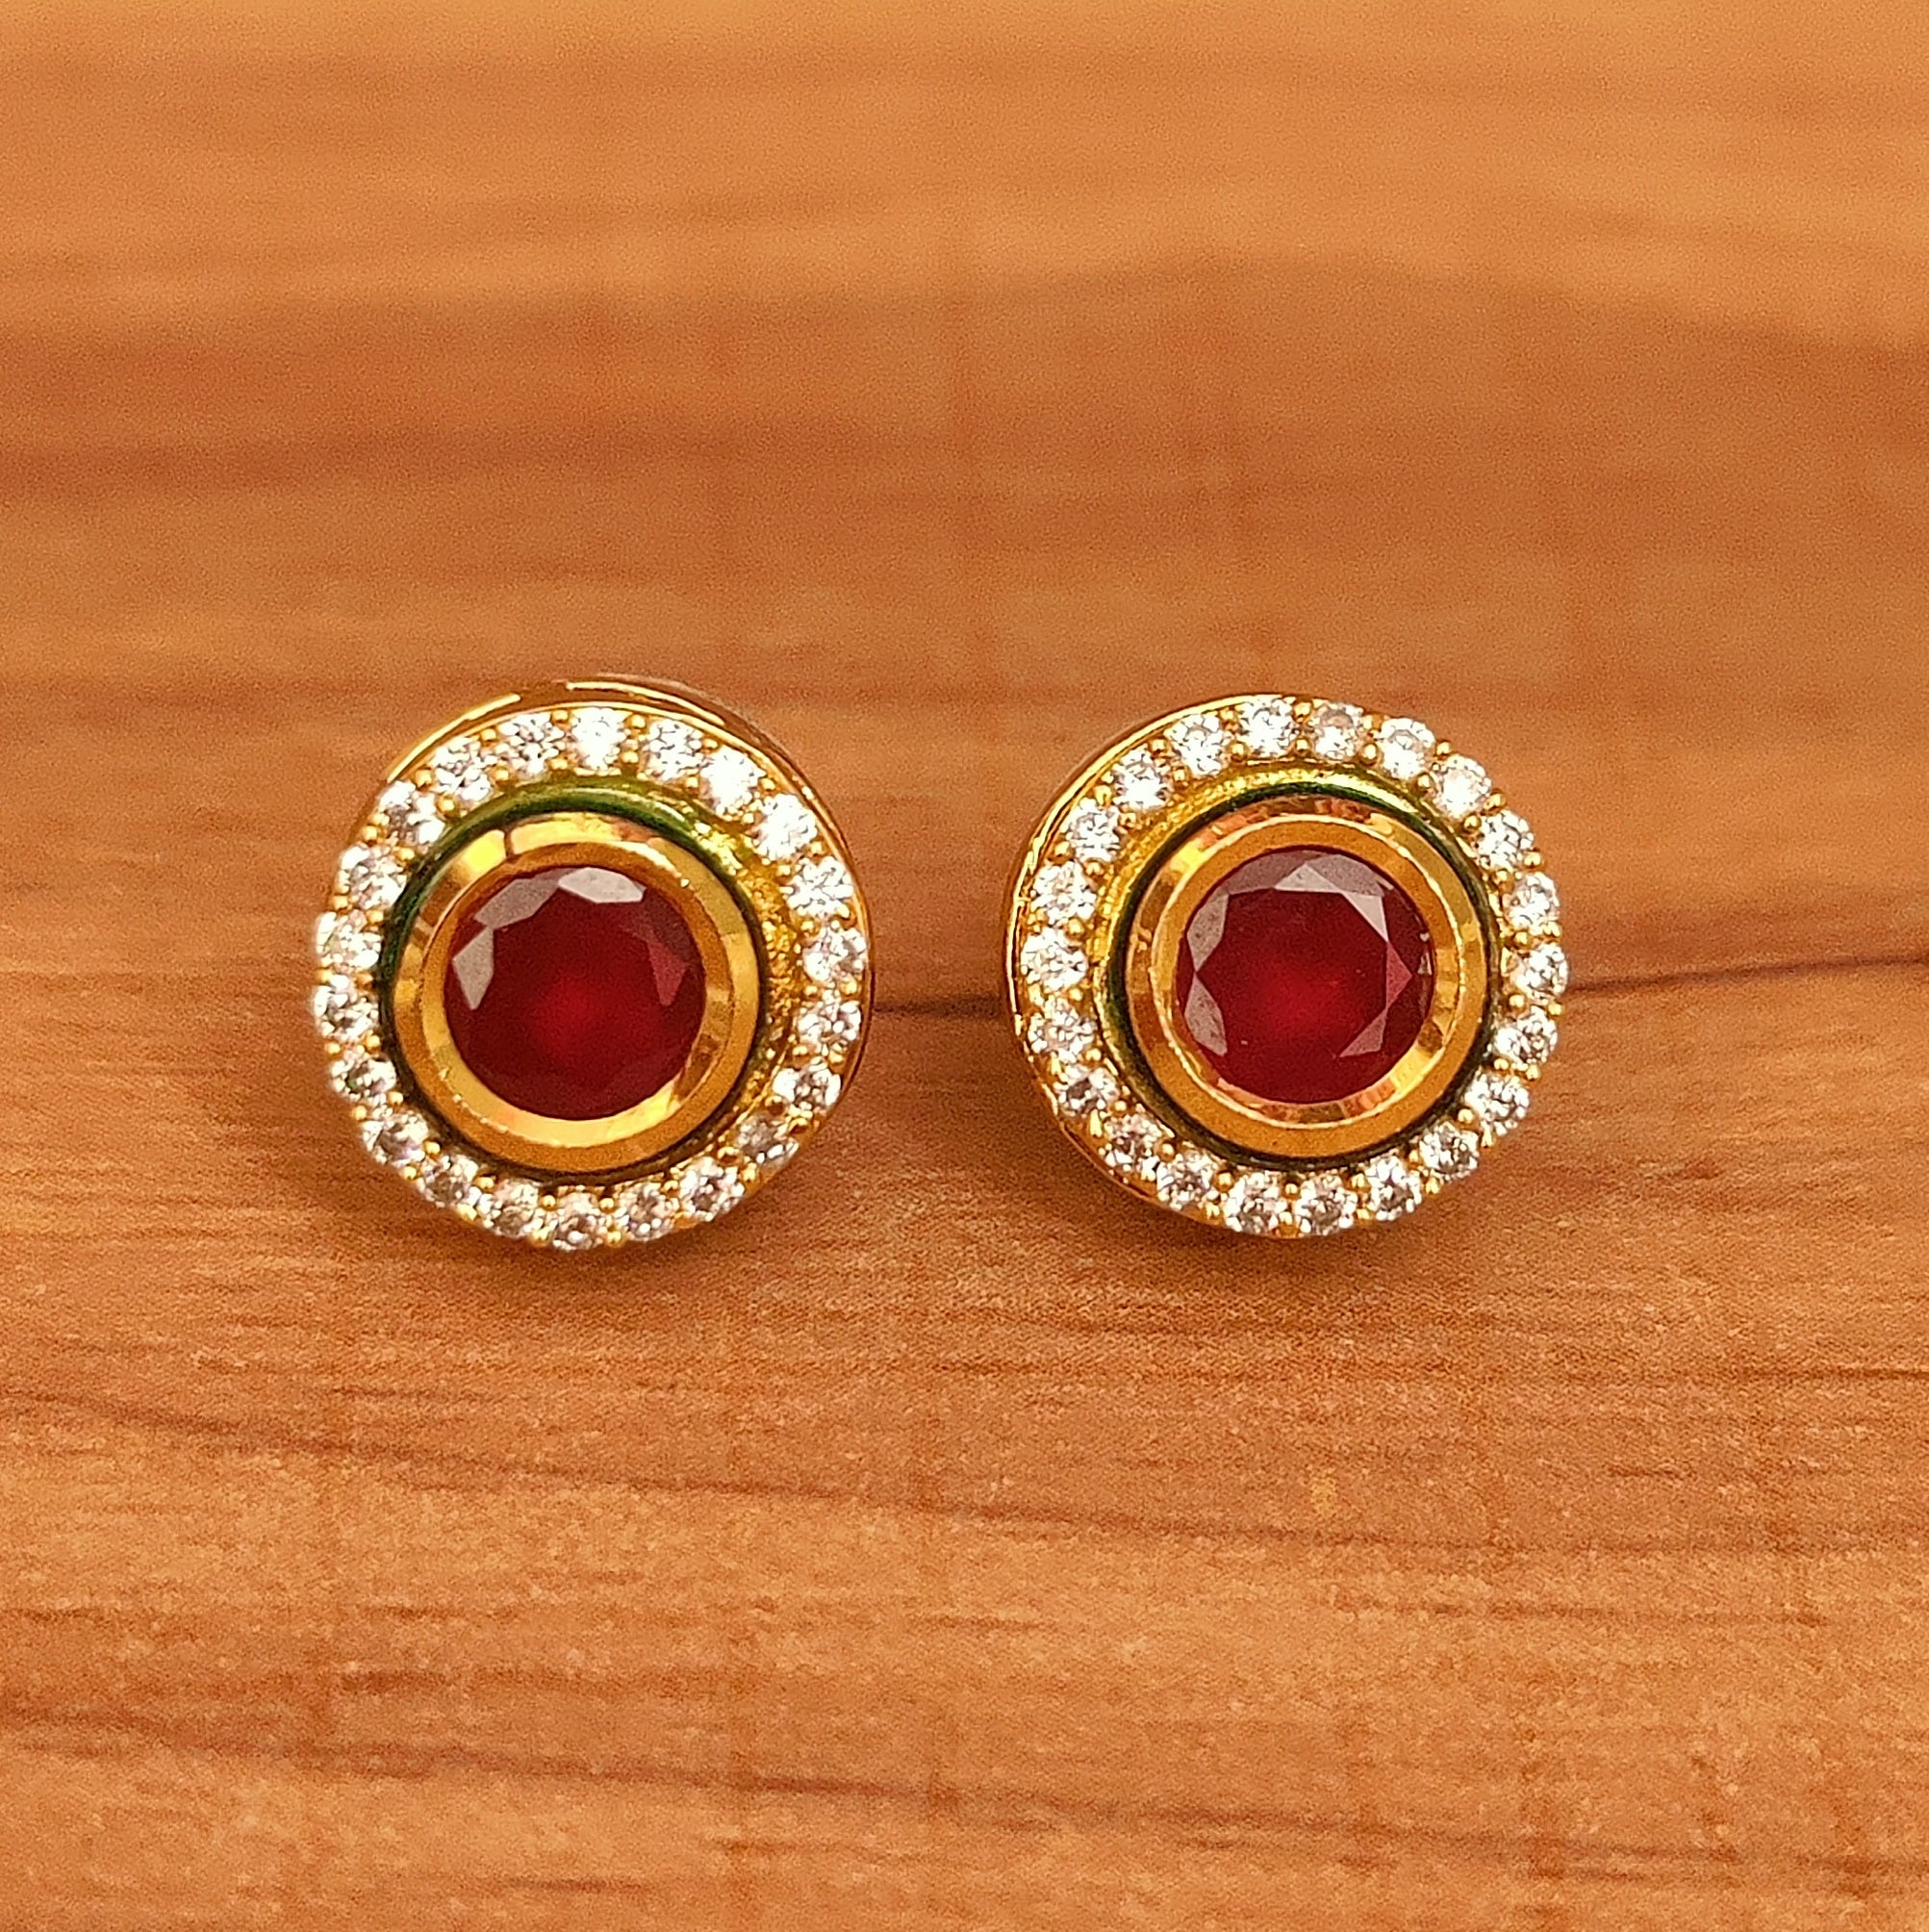 Gnoce Two Round Stone Stud Earrings - Gnoce.com